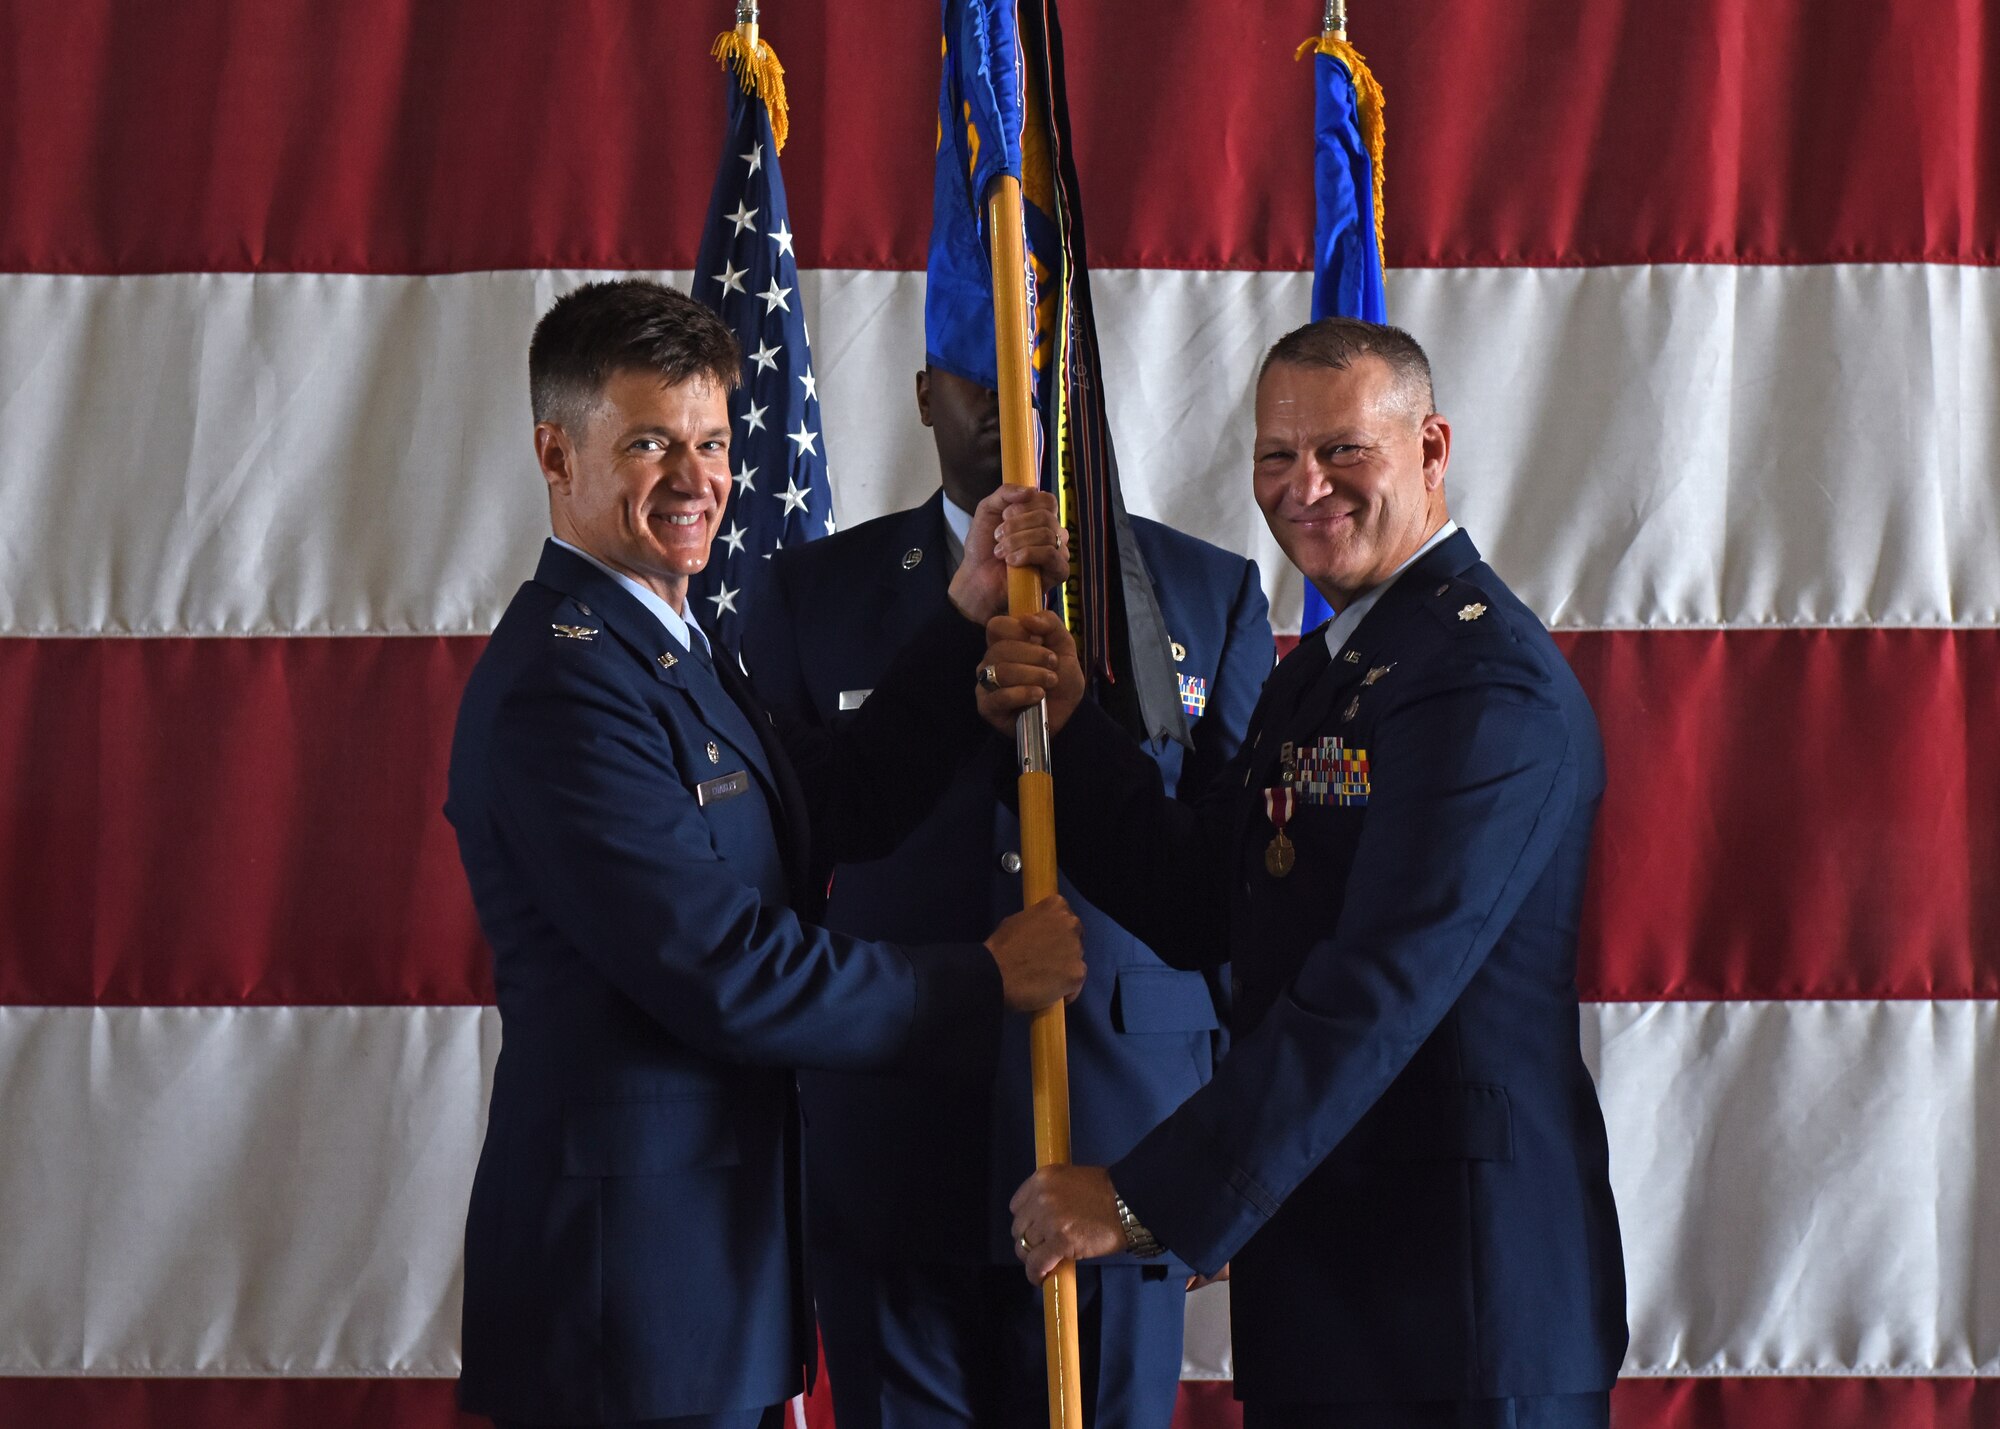 U.S. Air Force Col. Thomas Coakley, 17th Training Group commander, accepts the guidon from Lt. Col. Robert Kammerer, outgoing 316th Training Squadron commander, during the change of command ceremony at the Louis F. Garland Department of Defense Fire Academy High Bay on Goodfellow Air Force Base, Texas, June 21, 2019. The 316th TRS delivers innovative, state-of-the-art, and operationally relevant instruction to defeat current and future threats to our Nation, while developing and mentoring the next generation of warriors in cryptologic intelligence. (U.S. Air Force photo by Airman 1st Class Zachary Chapman/Released)